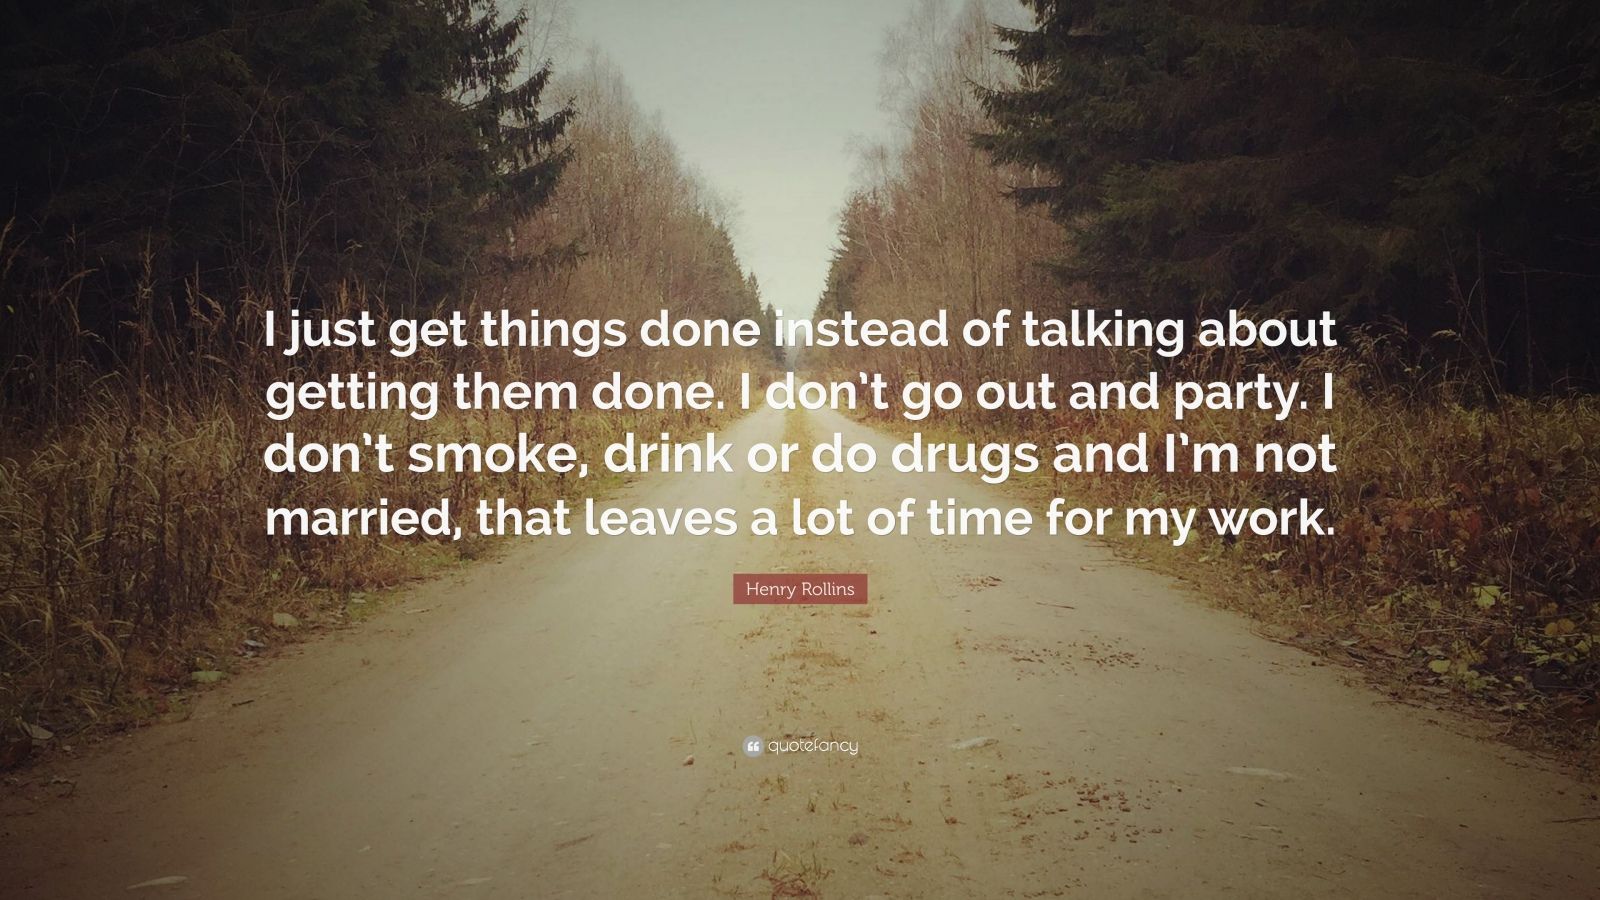 Henry Rollins Quote: “I just get things done instead of talking about